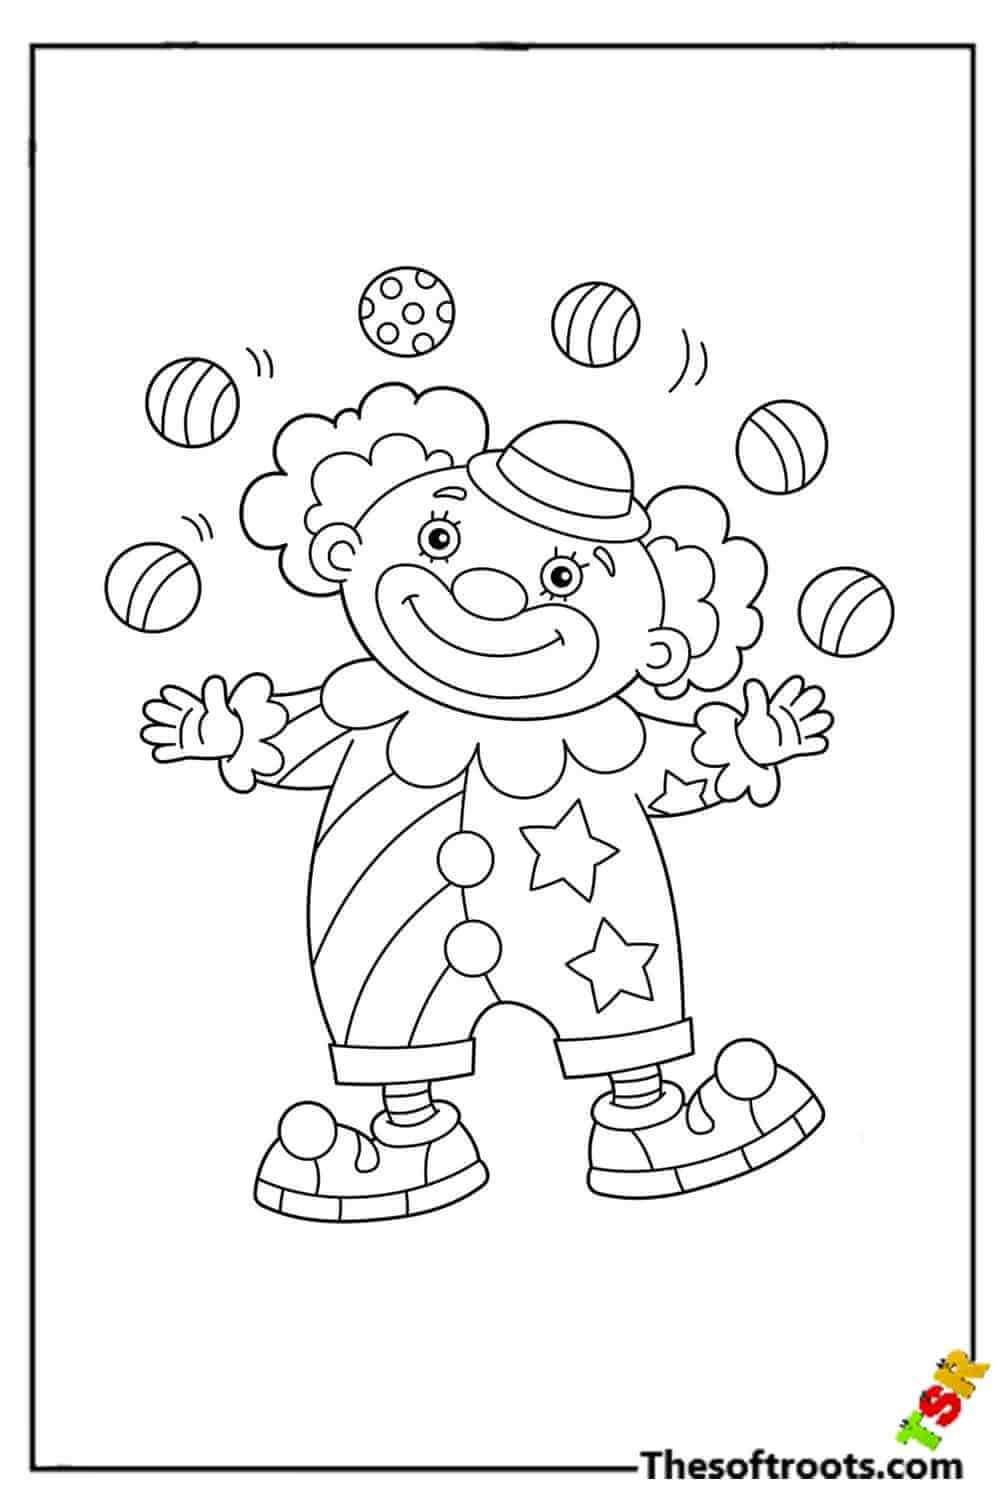 Clown Coloring pages